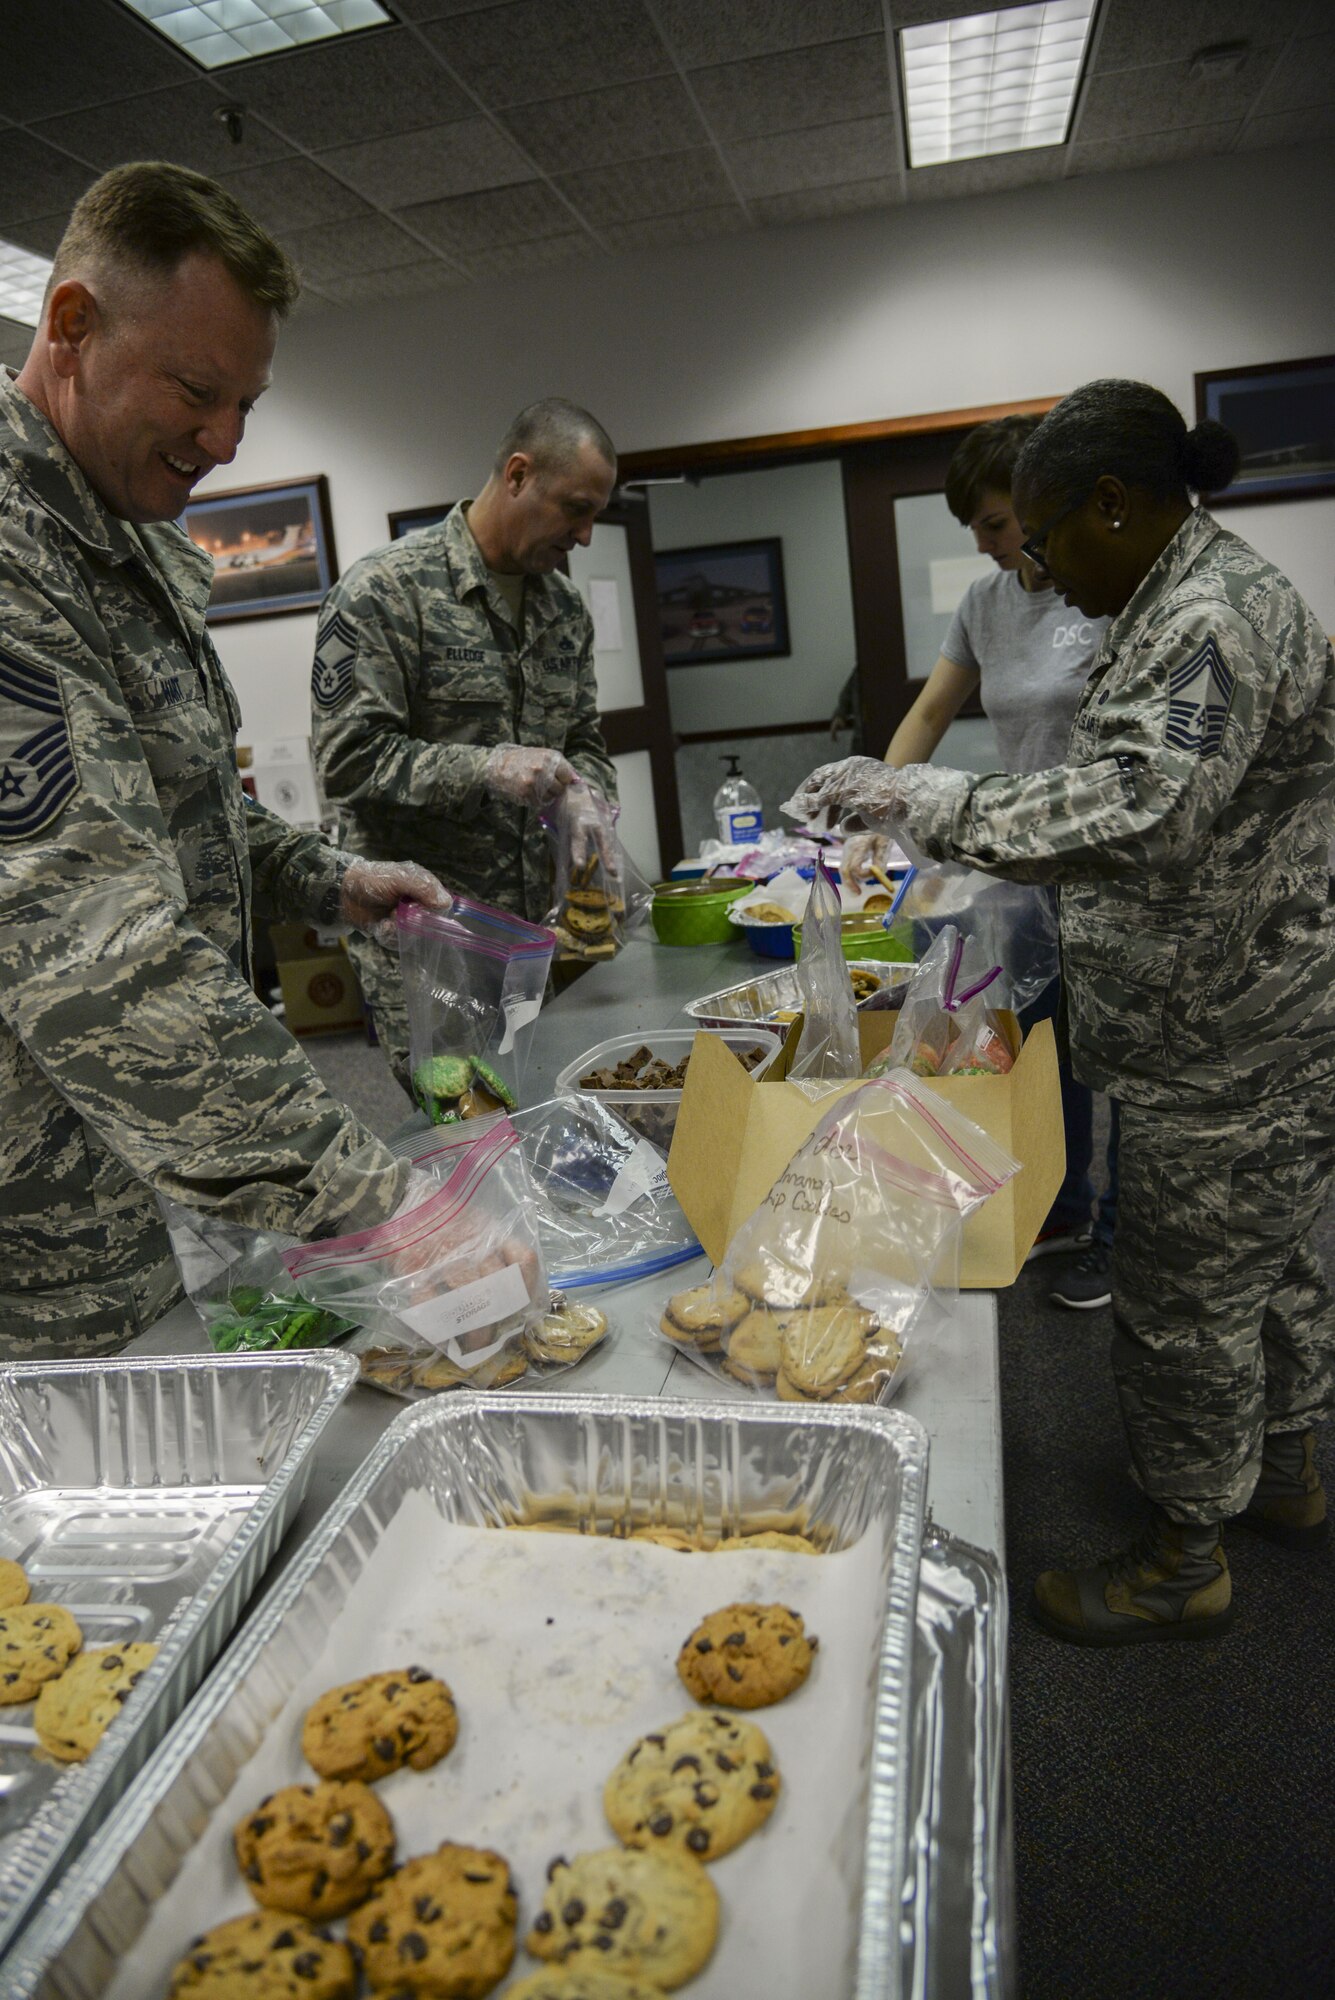 Team Dover leadership packages cookies Dec. 18, 2017, during Operation Cookie Drop at the 9th Airlift Squadron on Dover Air Force Base, Del. Volunteers packaged cookies during four, one-hour shifts to ensure every dorm resident received a dozen cookies during the holiday season. (U.S. Air Force photo by Staff Sgt. Aaron J. Jenne)